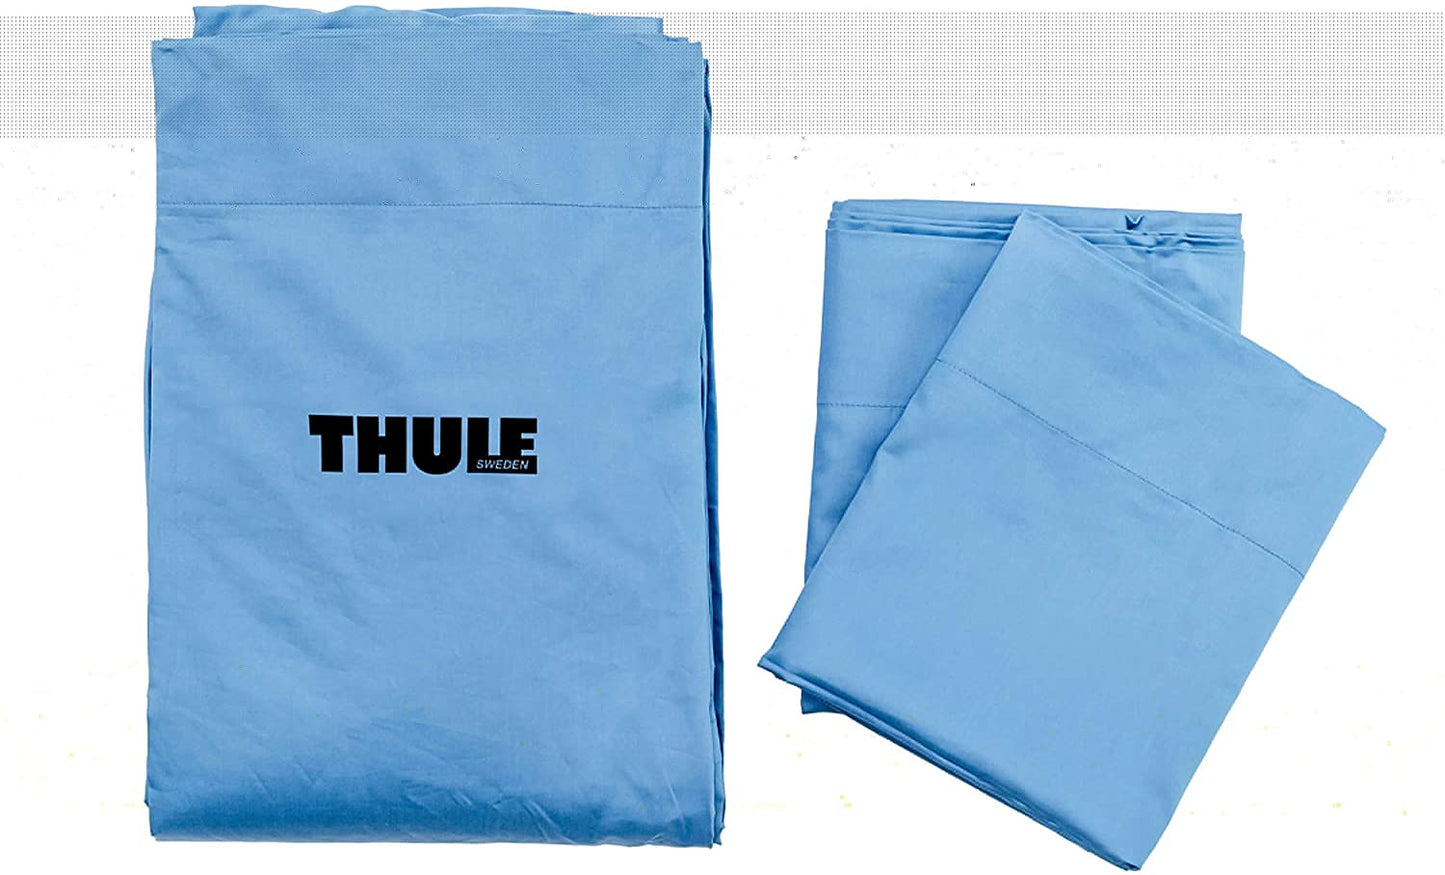 Thule Sheets 3 3-person sheets bedding